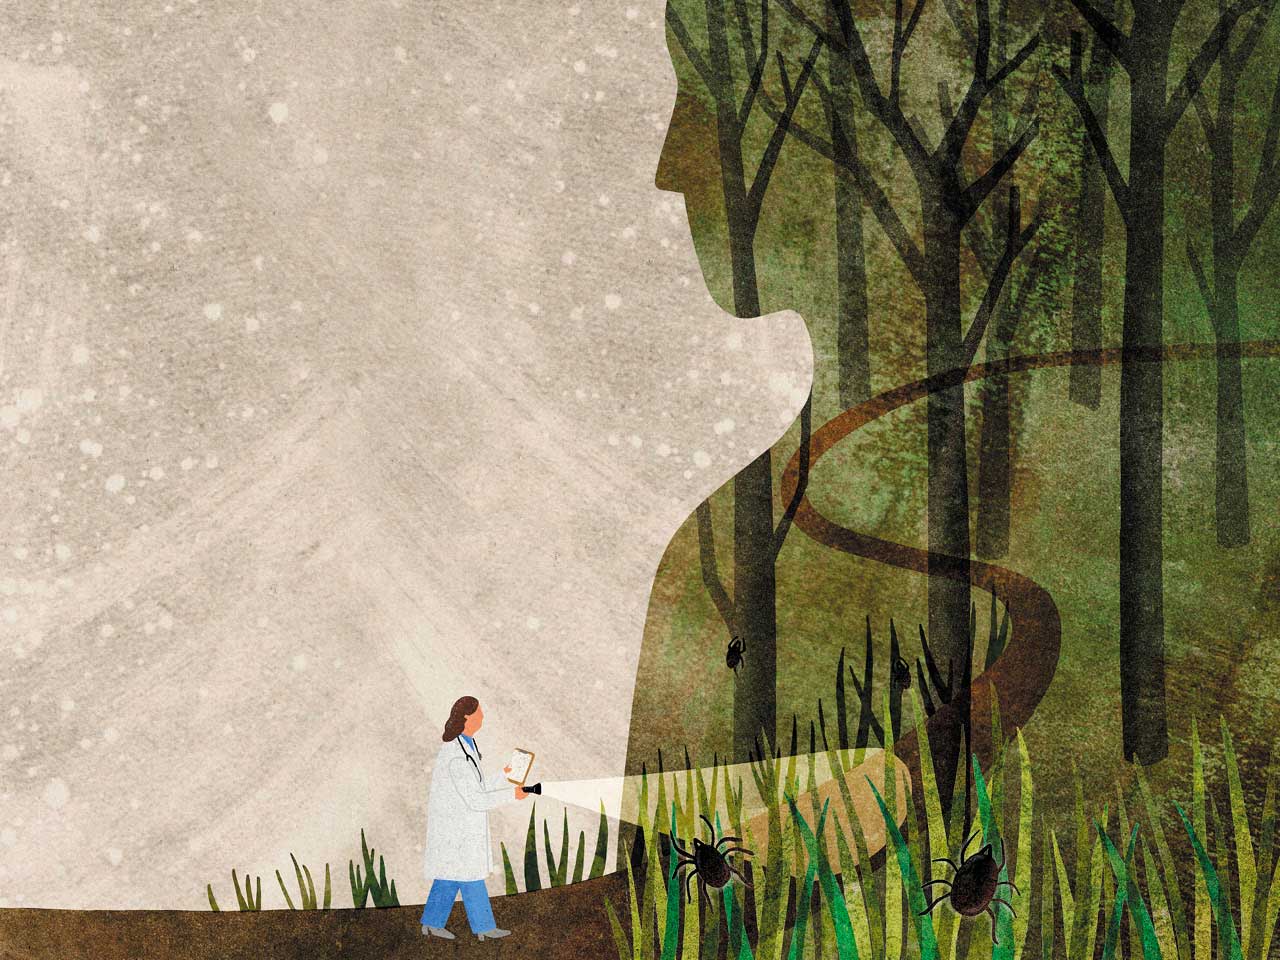 An illustration of a doctor heading into a forest with a flashlight, looking for ticks